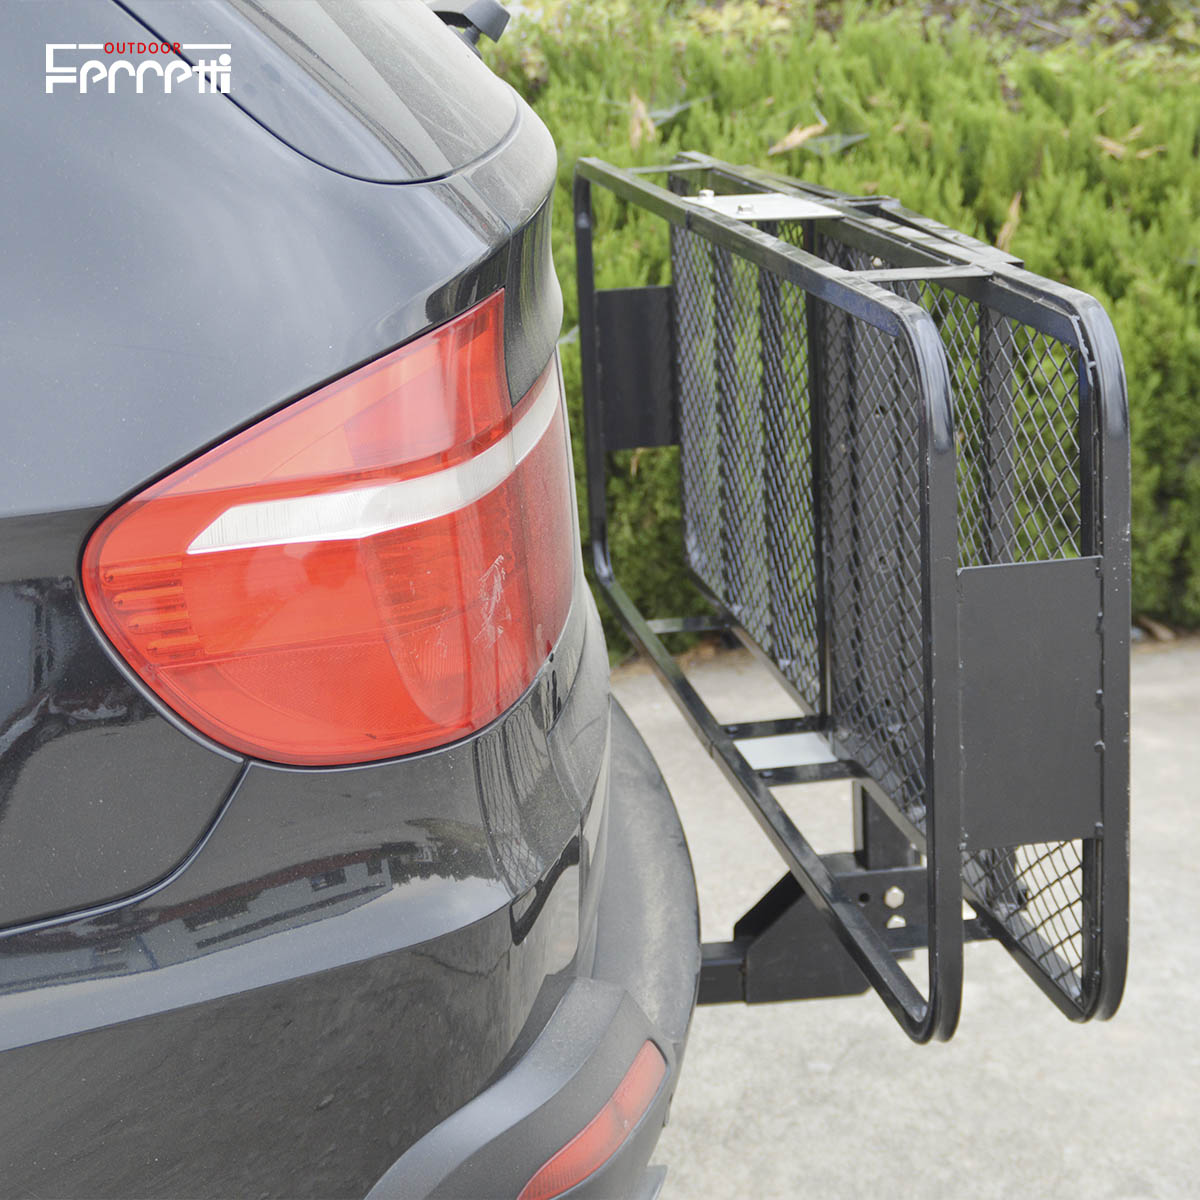 Folding,Hitch-mounted,basket-style cargo carrier